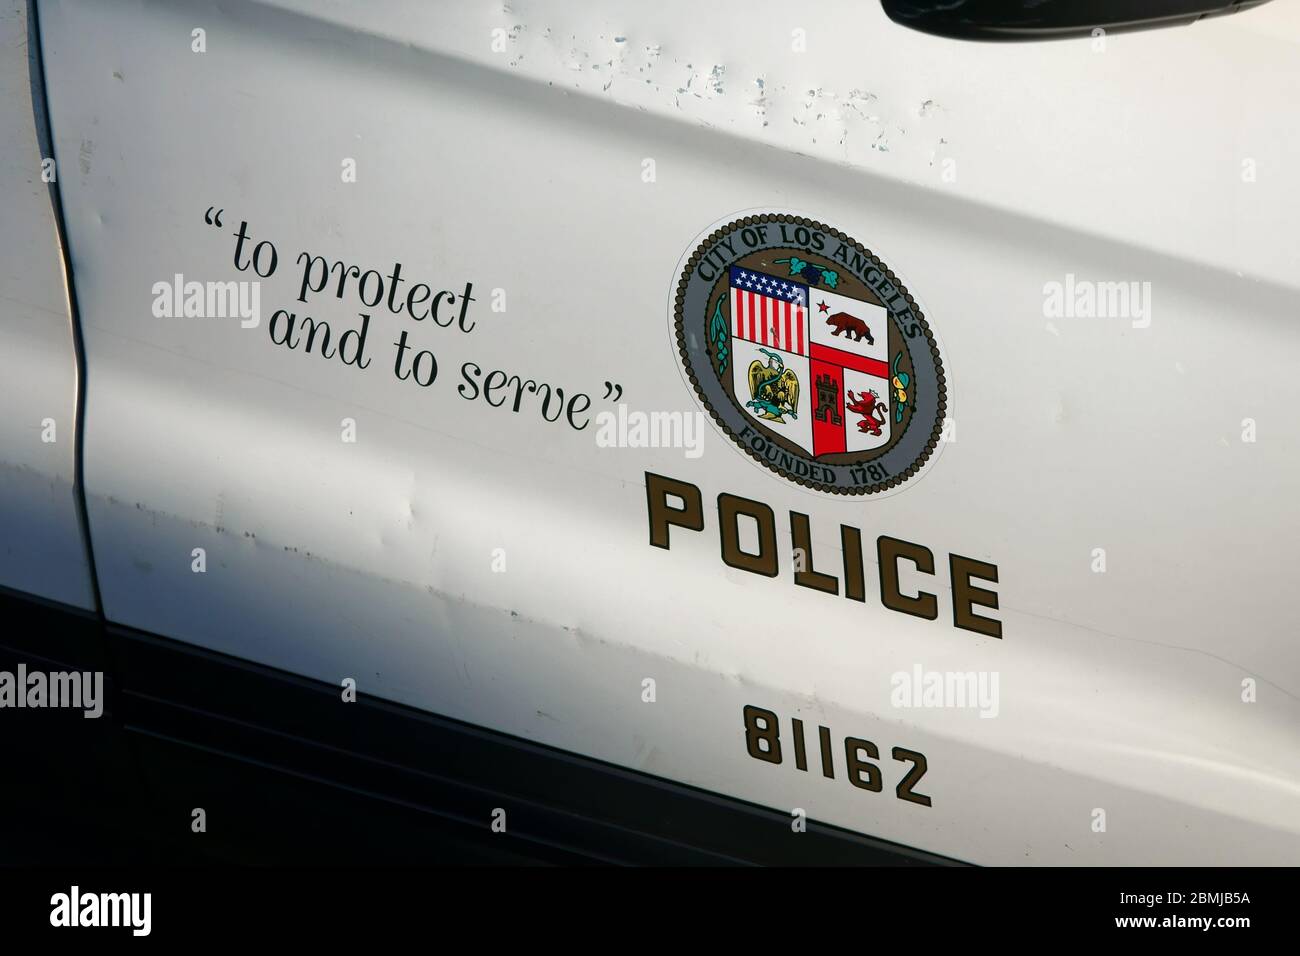 North Hollywood, CA / USA - May 8, 2020: The City of Los Angeles emblem and  “to protect and to serve” motto are shown on an LAPD police car Stock Photo  - Alamy